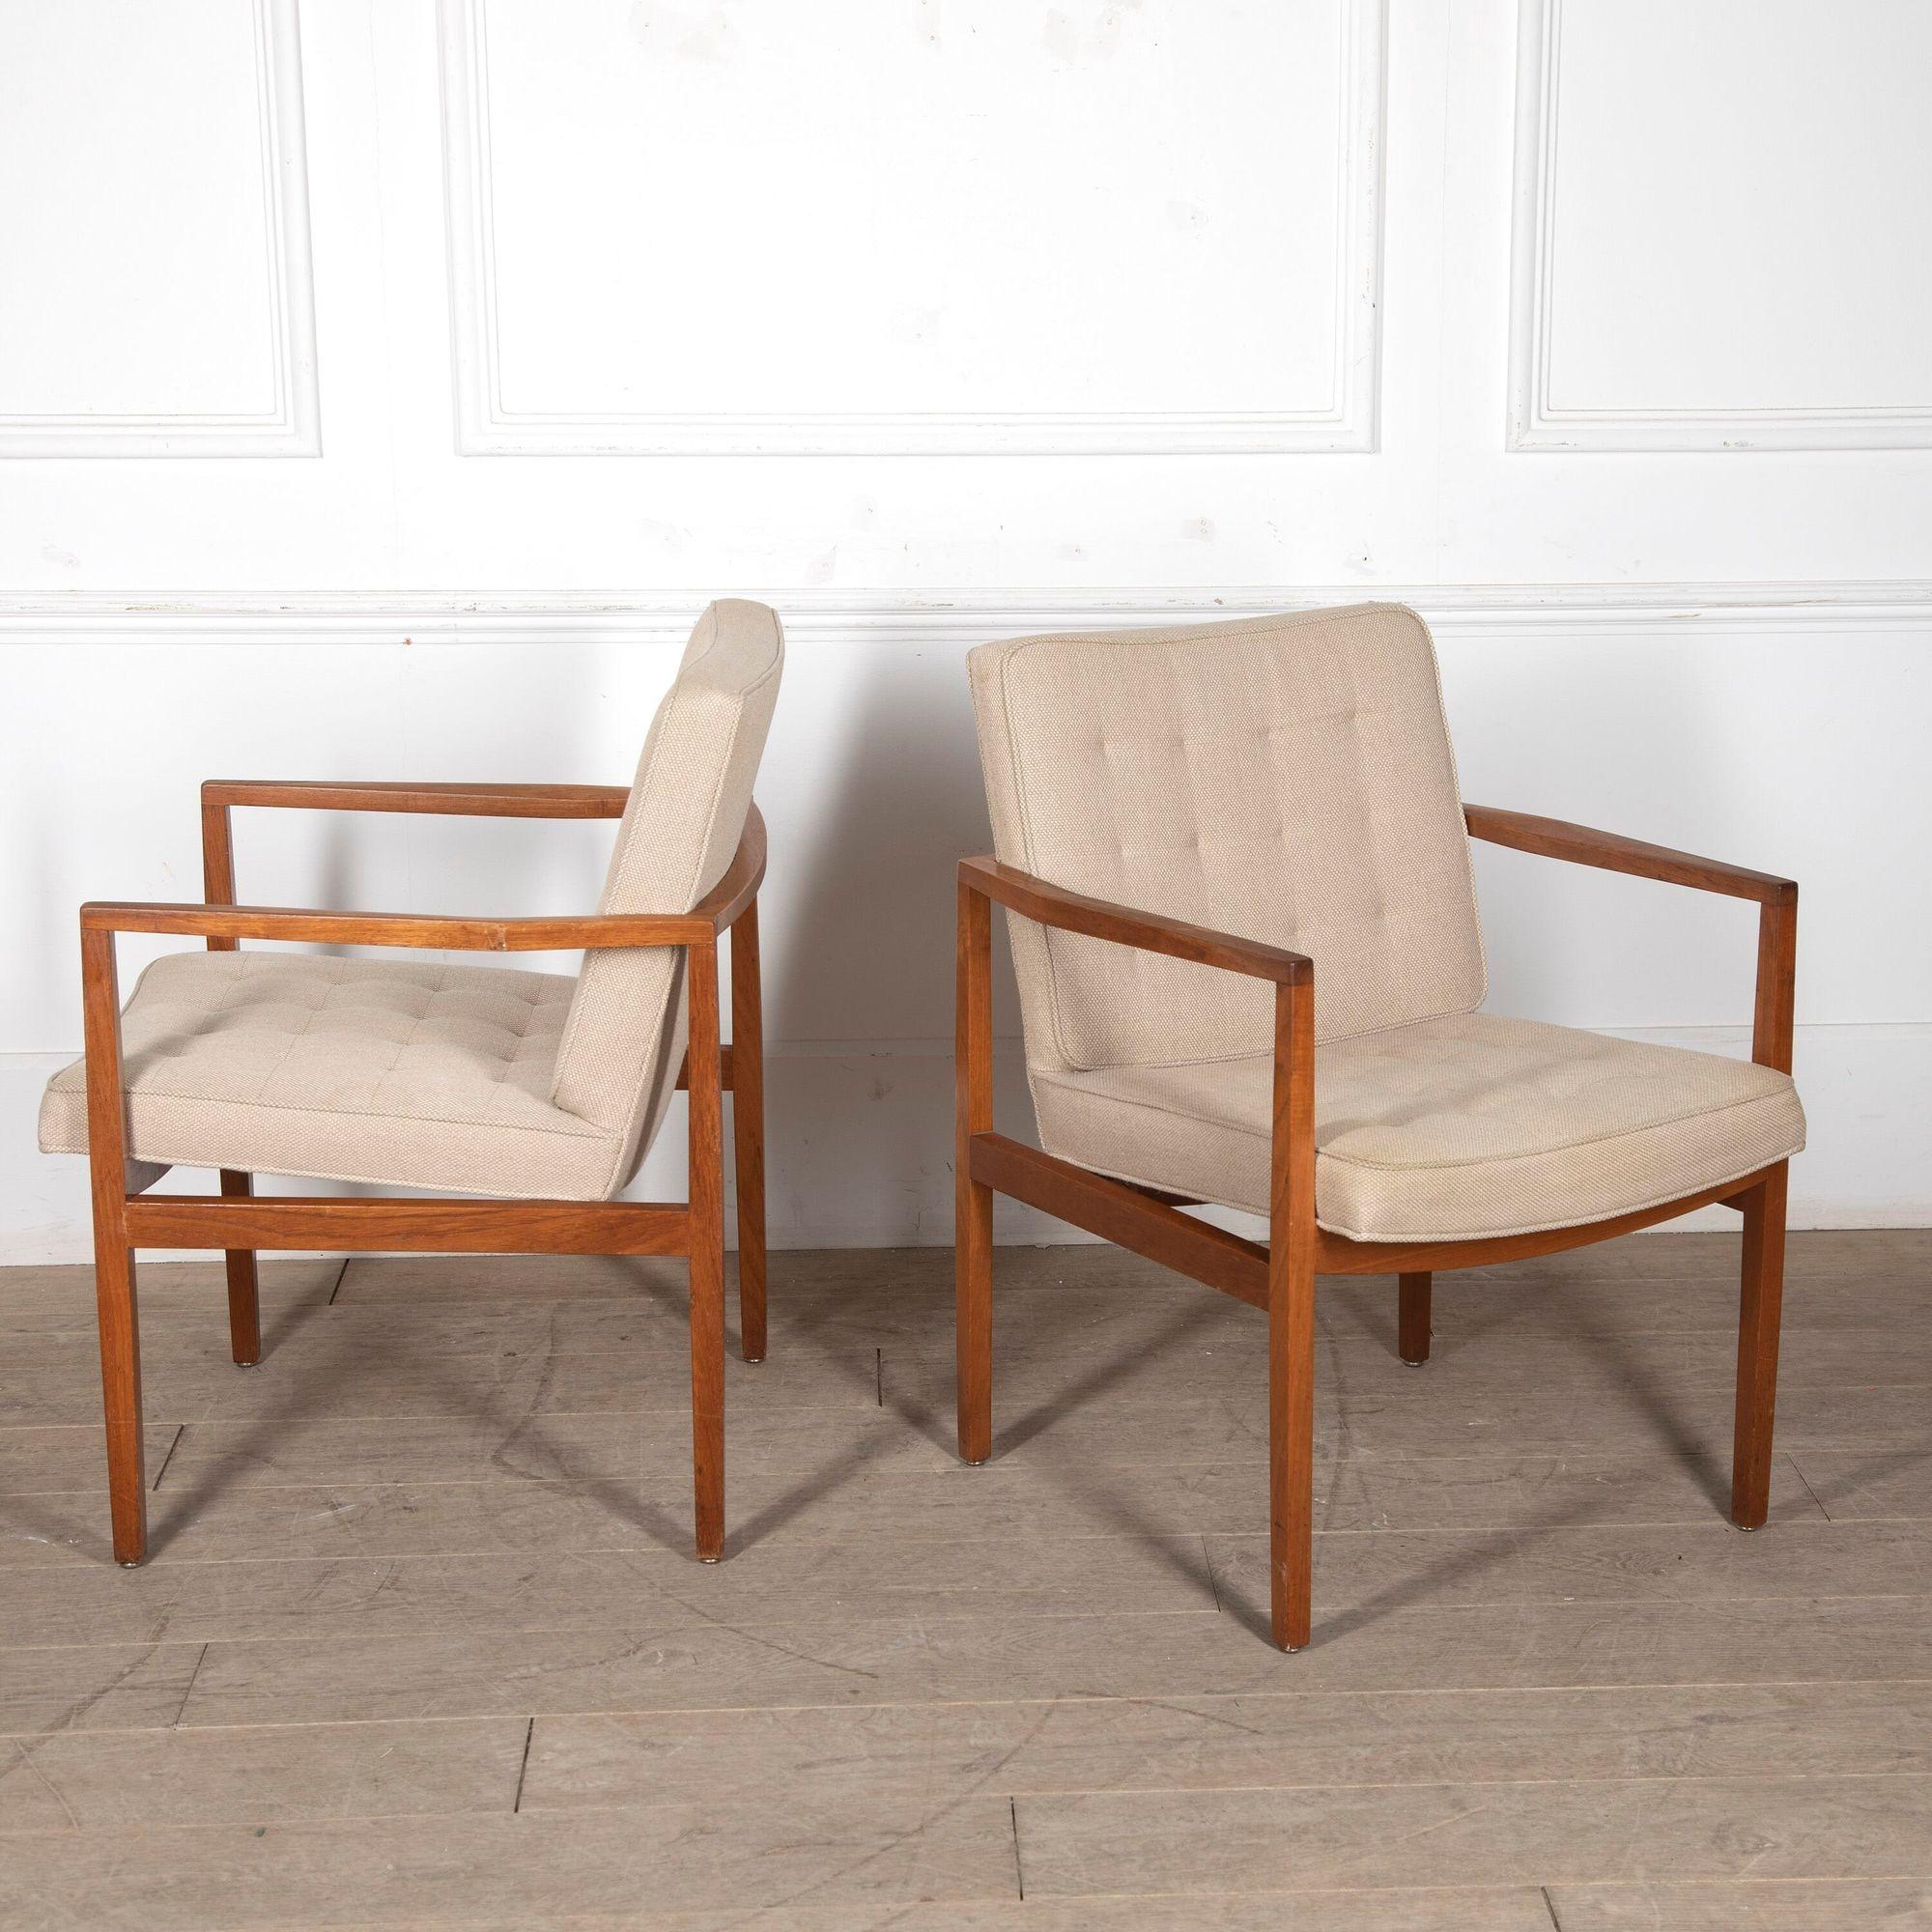 Pair of 20th Century Knoll International oak framed armchairs designed by Vincent Cafiero.
Circa 1950.